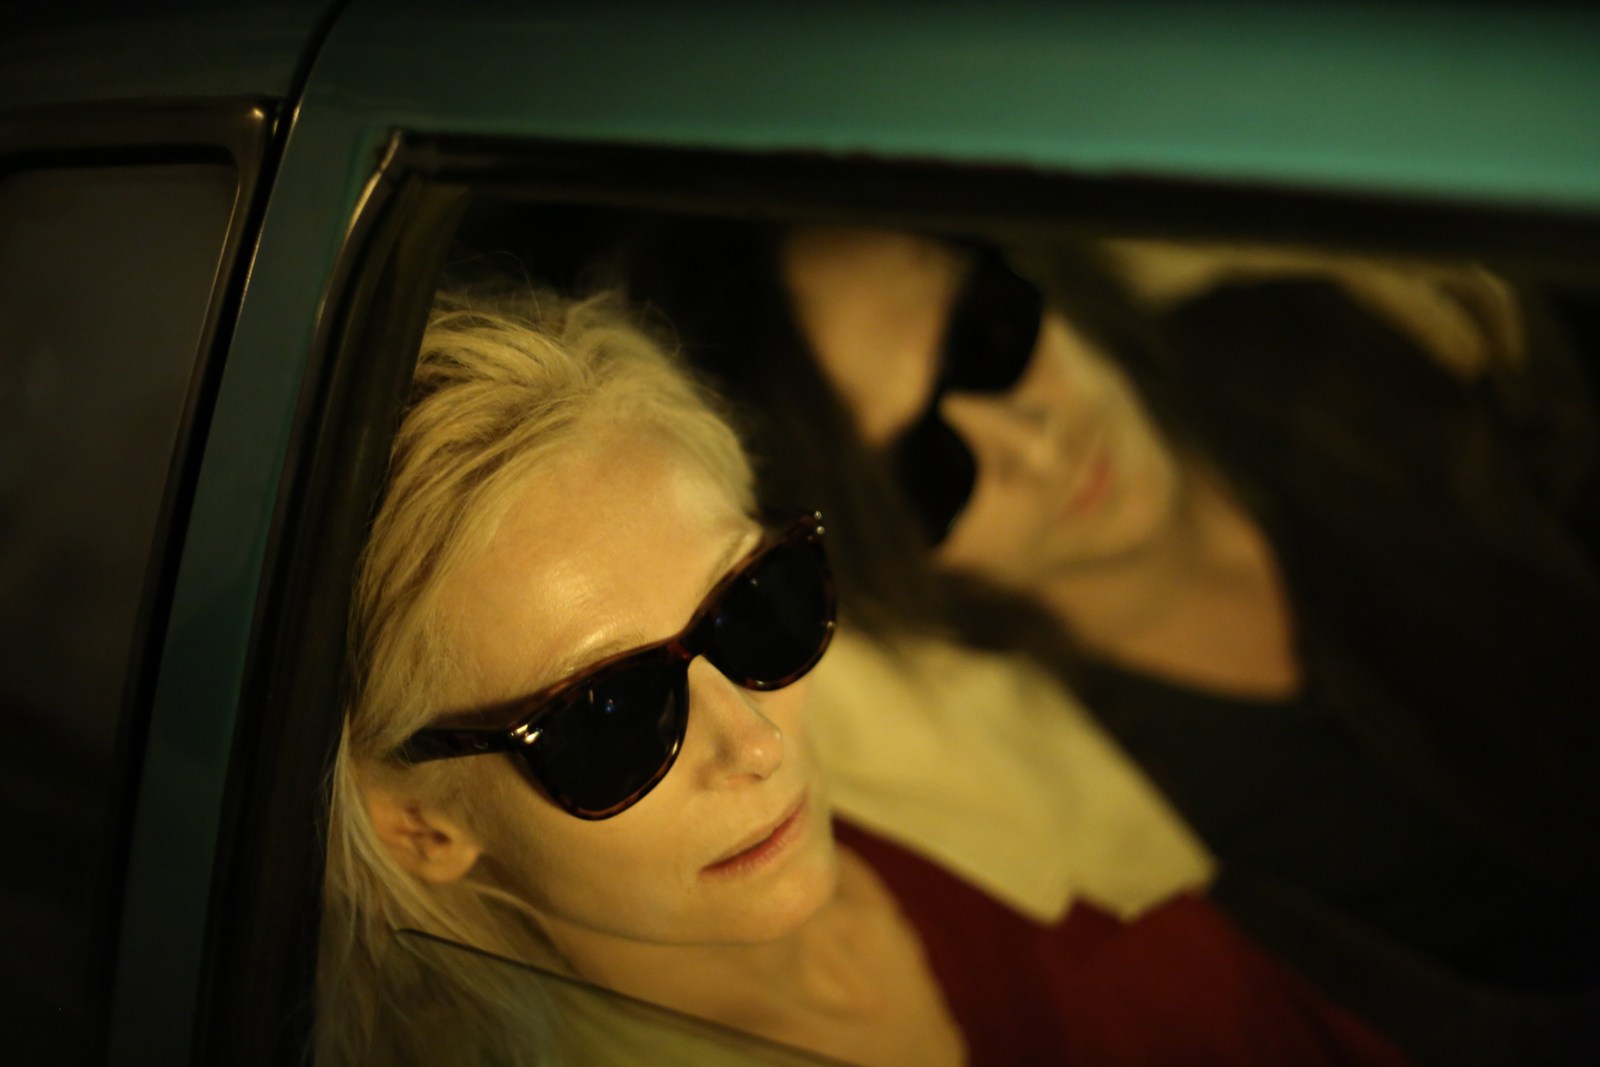 [critique] ONLY LOVERS LEFT ALIVE